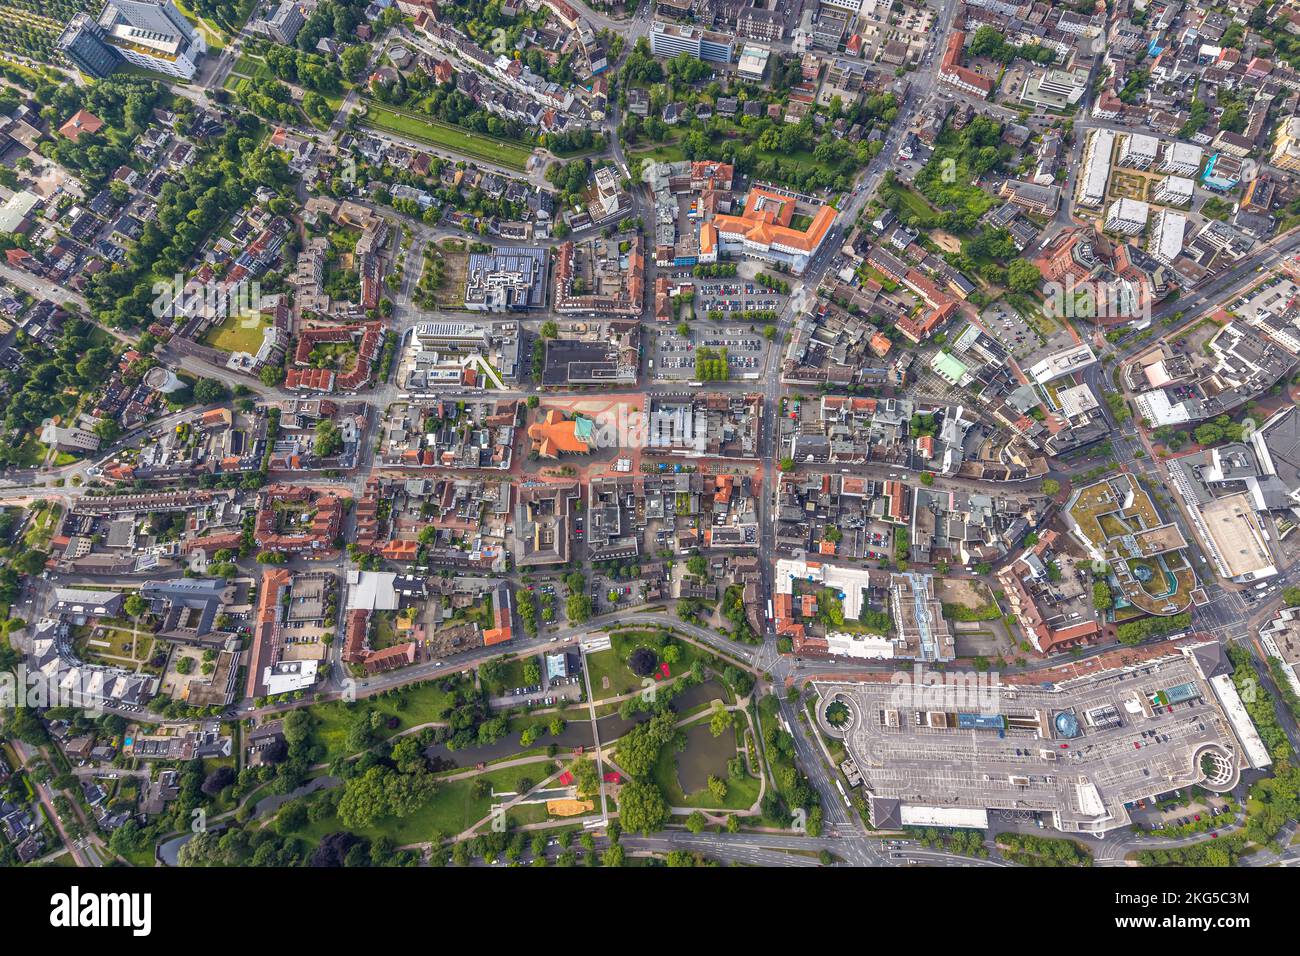 Aerial view, city center view with Allee-Center, evang. Pauluskirche and St. Marien-Hospital, Mitte, Hamm, Ruhrgebiet, North Rhine-Westphalia, Germany Stock Photo